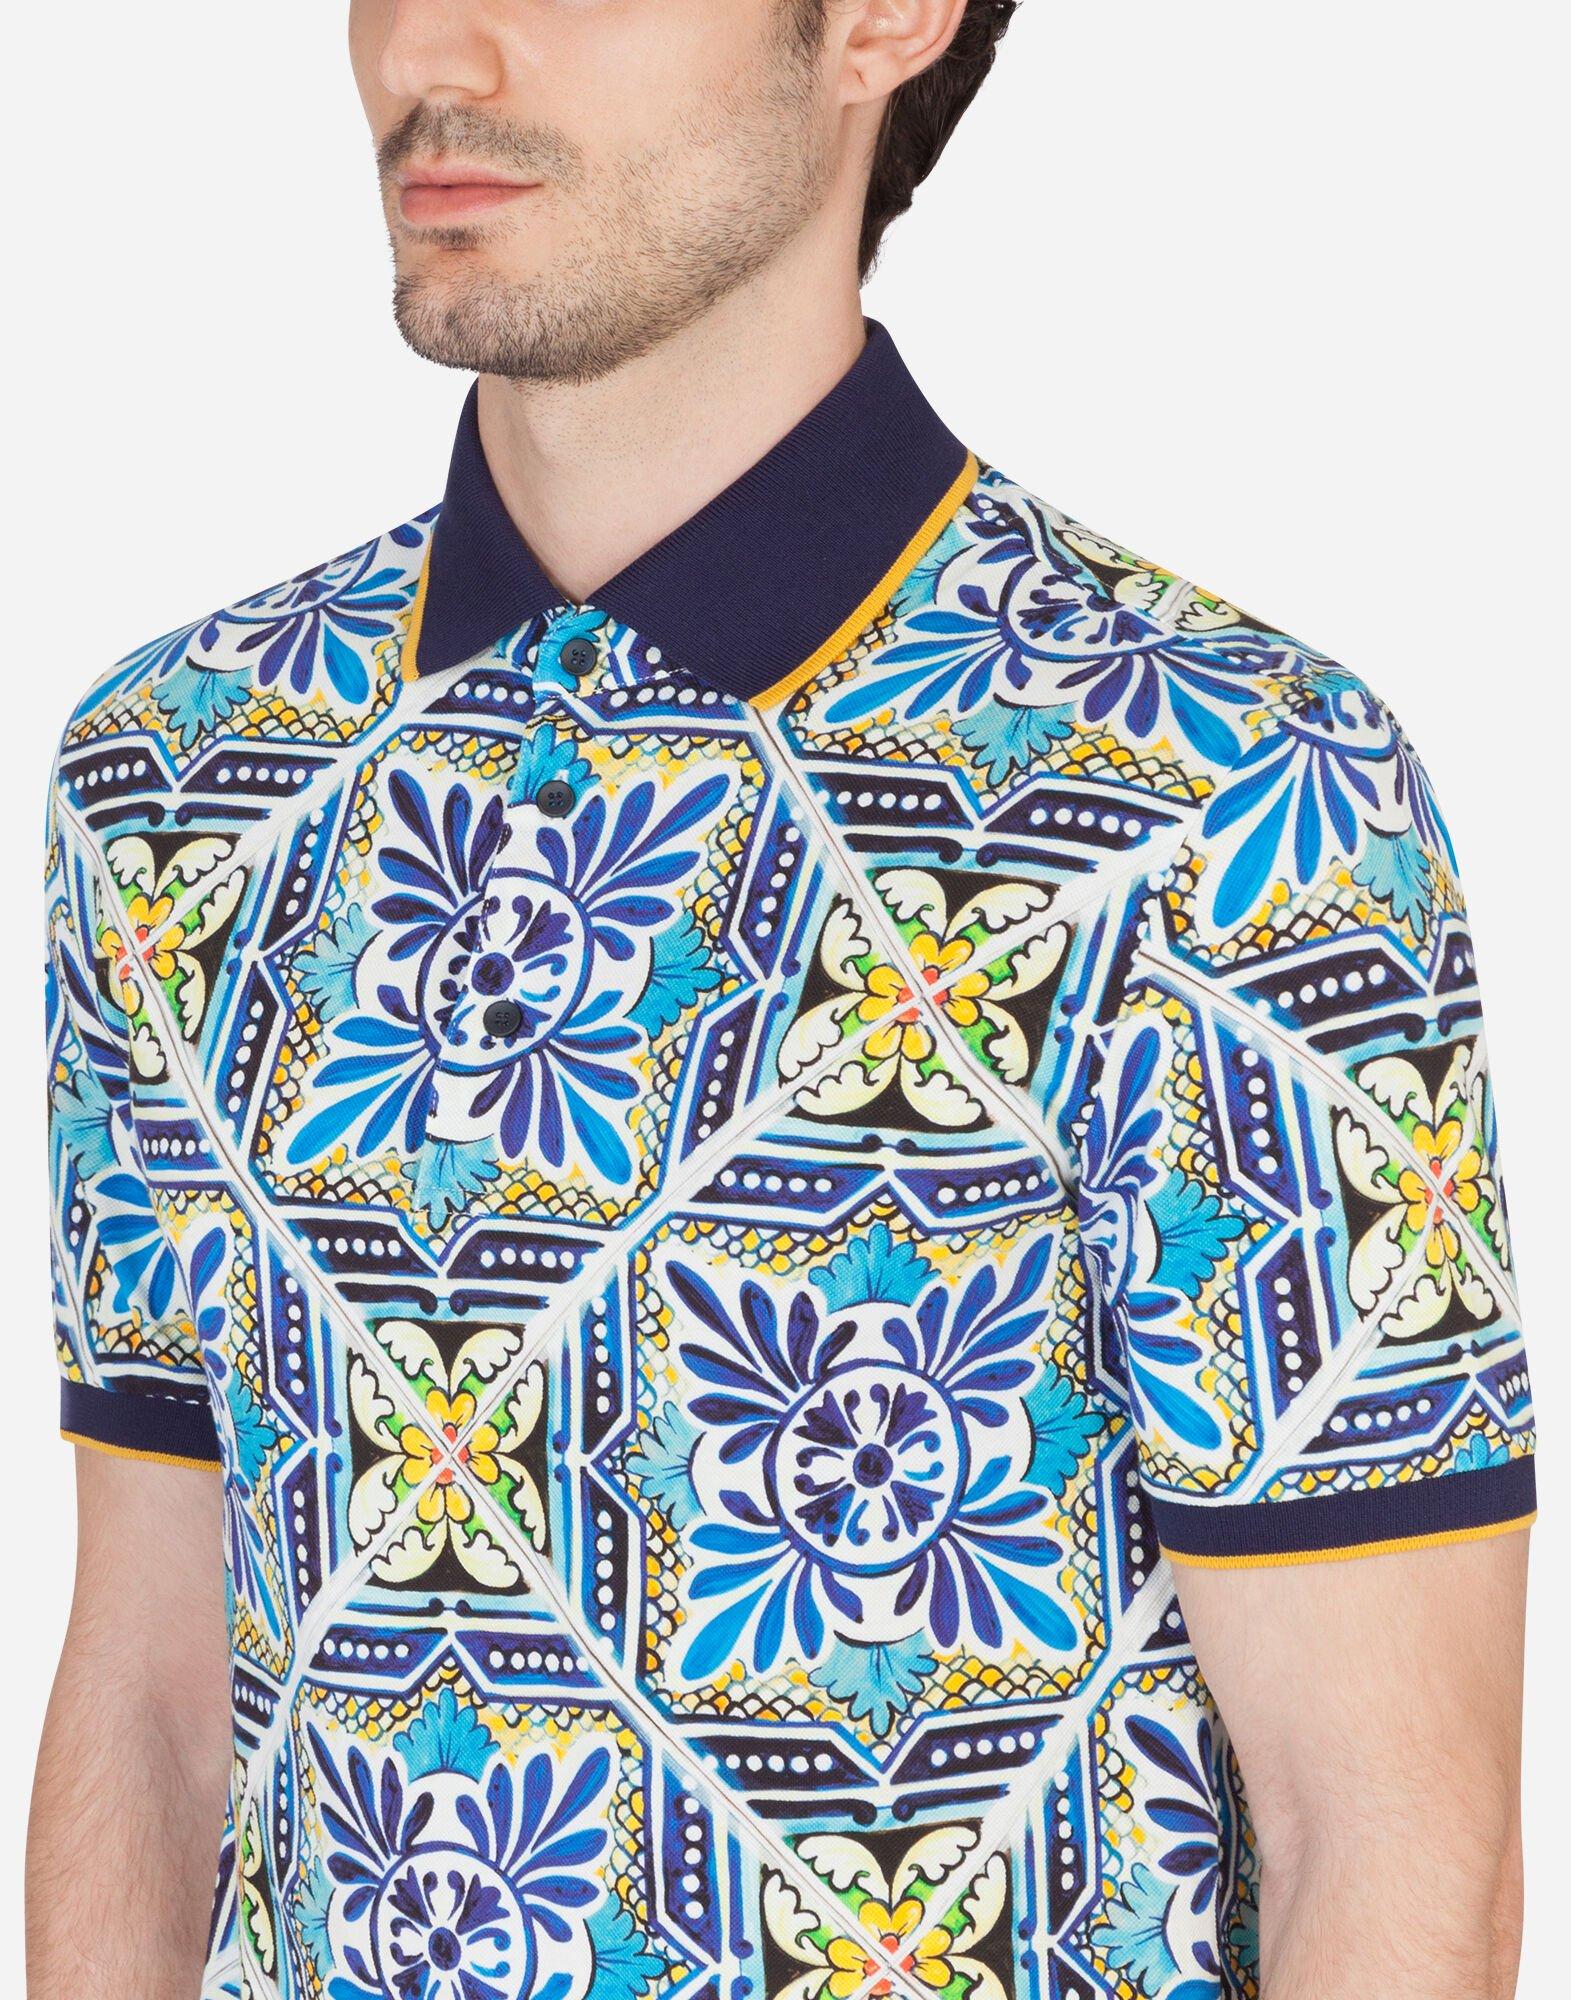 Dolce & Gabbana Cotton Polo Shirt With Maiolica Print in Blue for Men